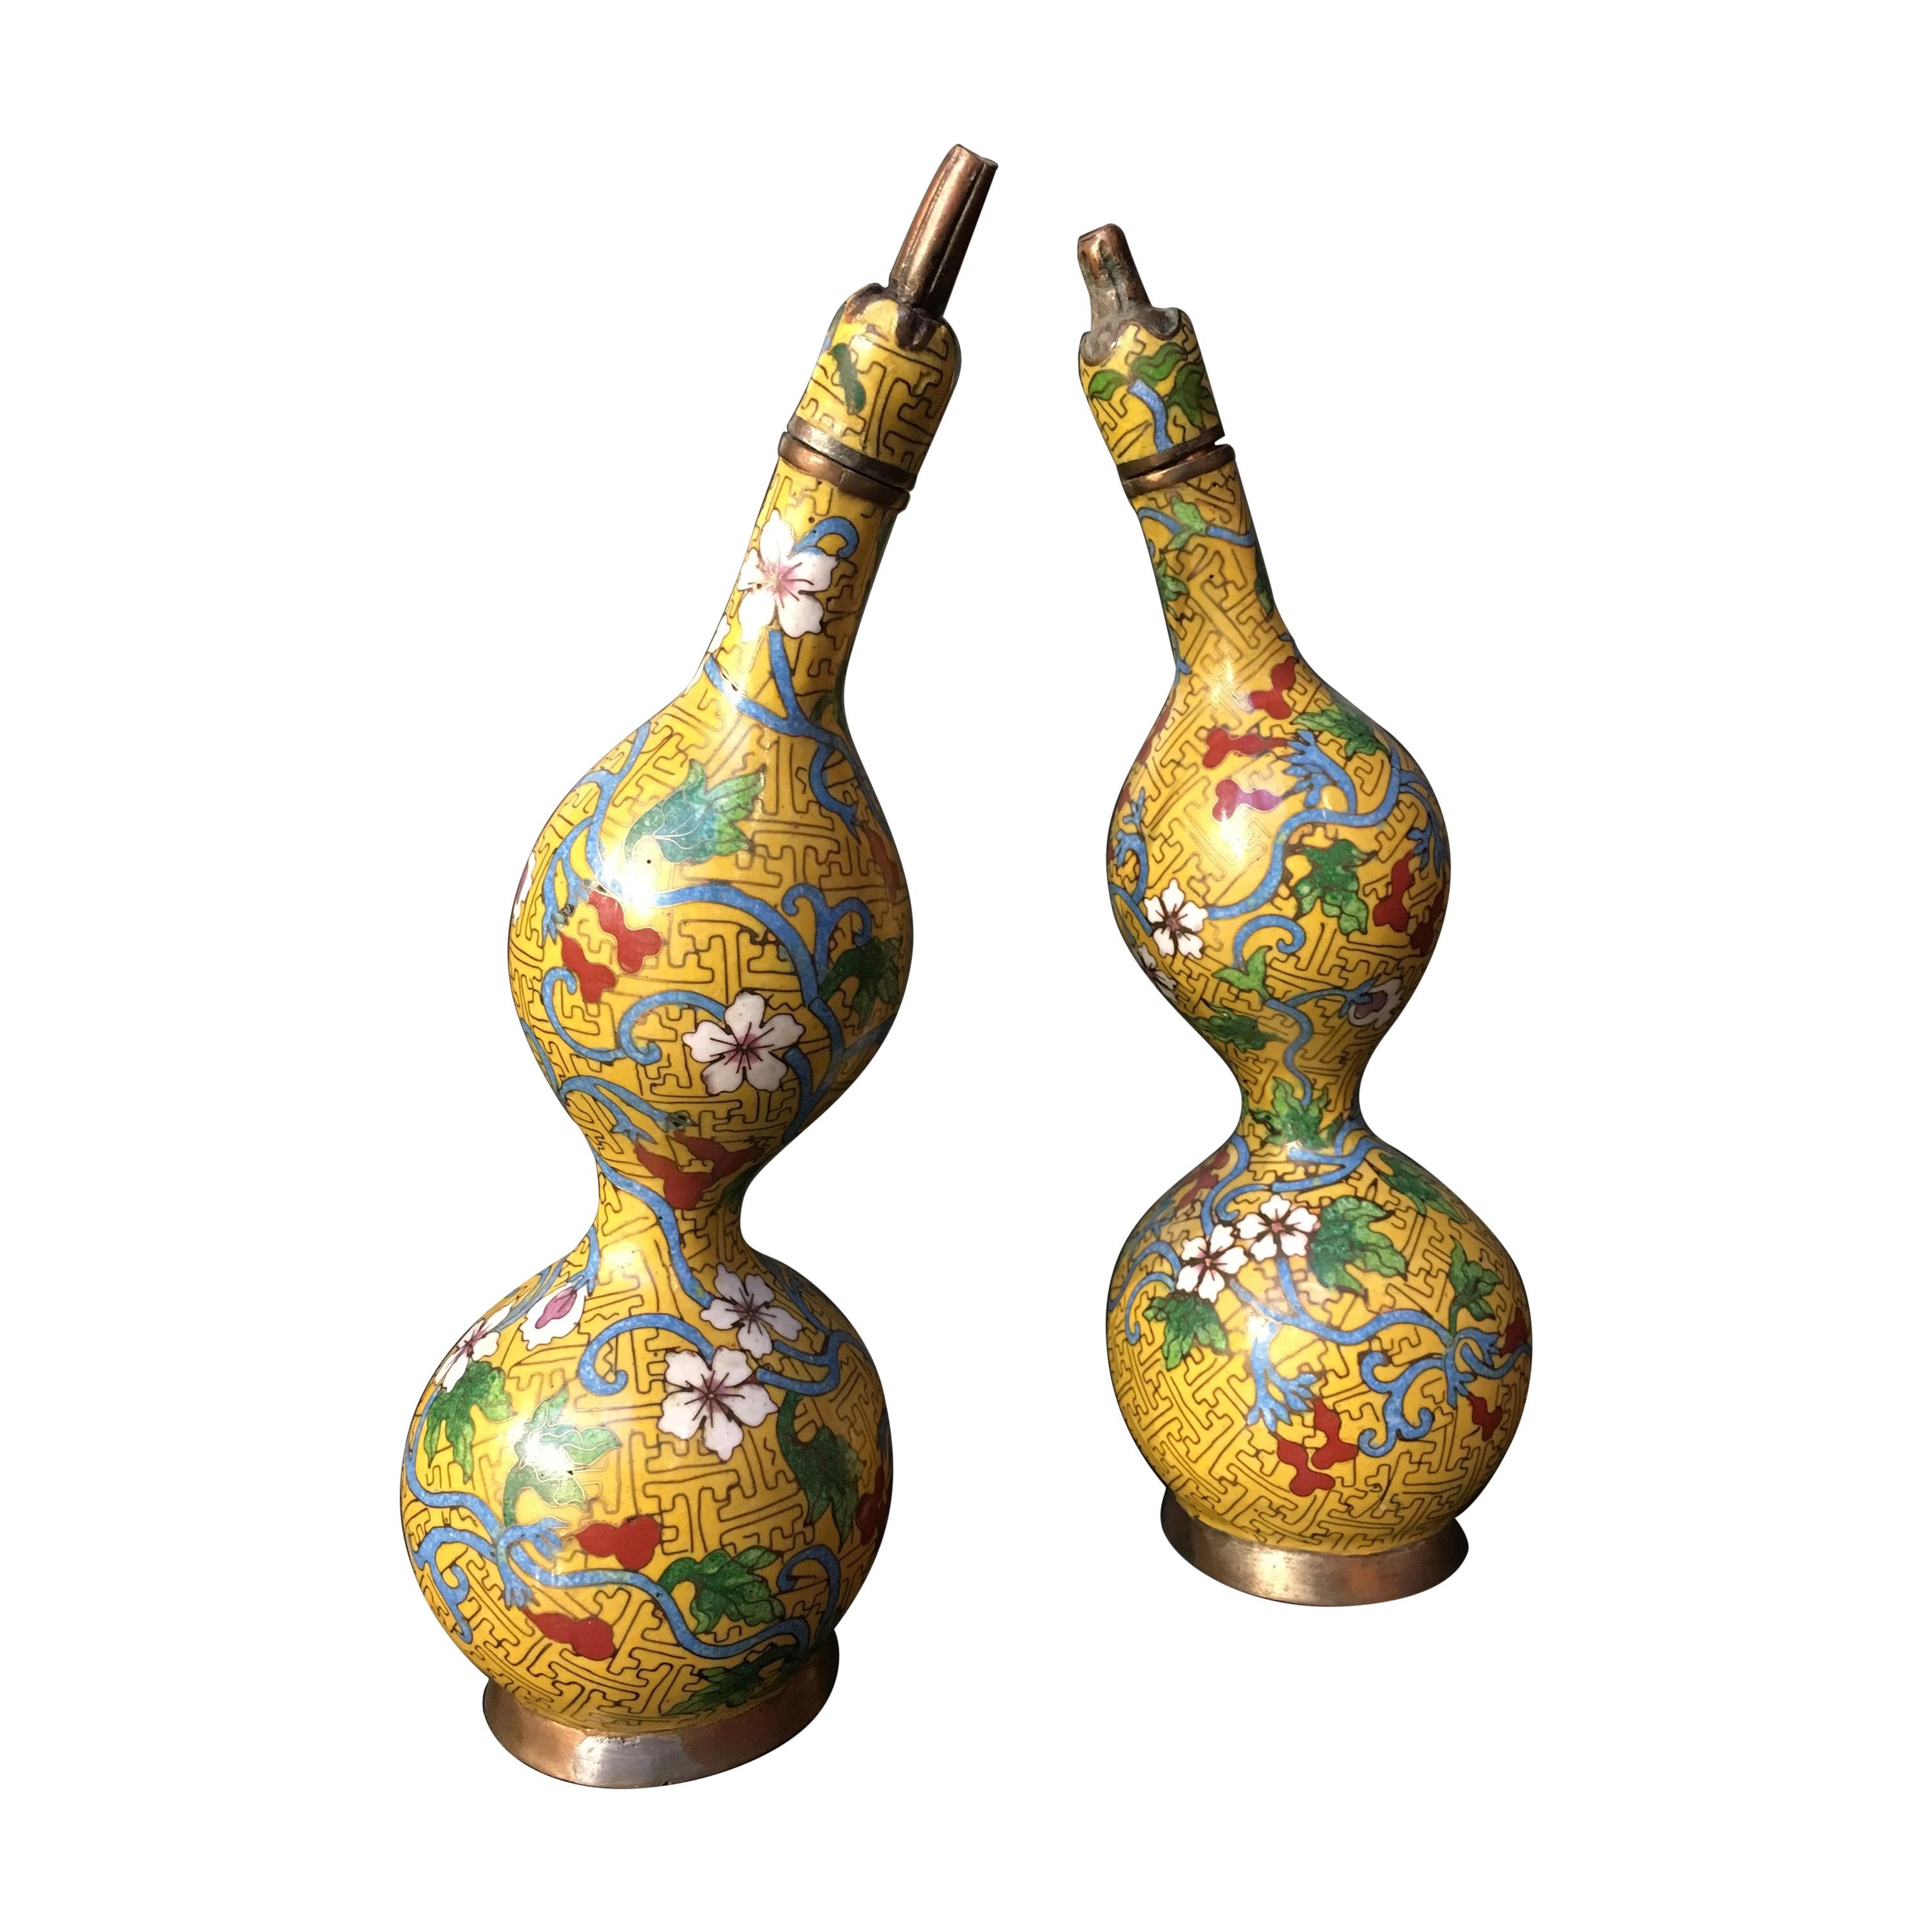 Pair of Chinese Yellow Cloisonne Double Gourd Bottles, Early 20th Century